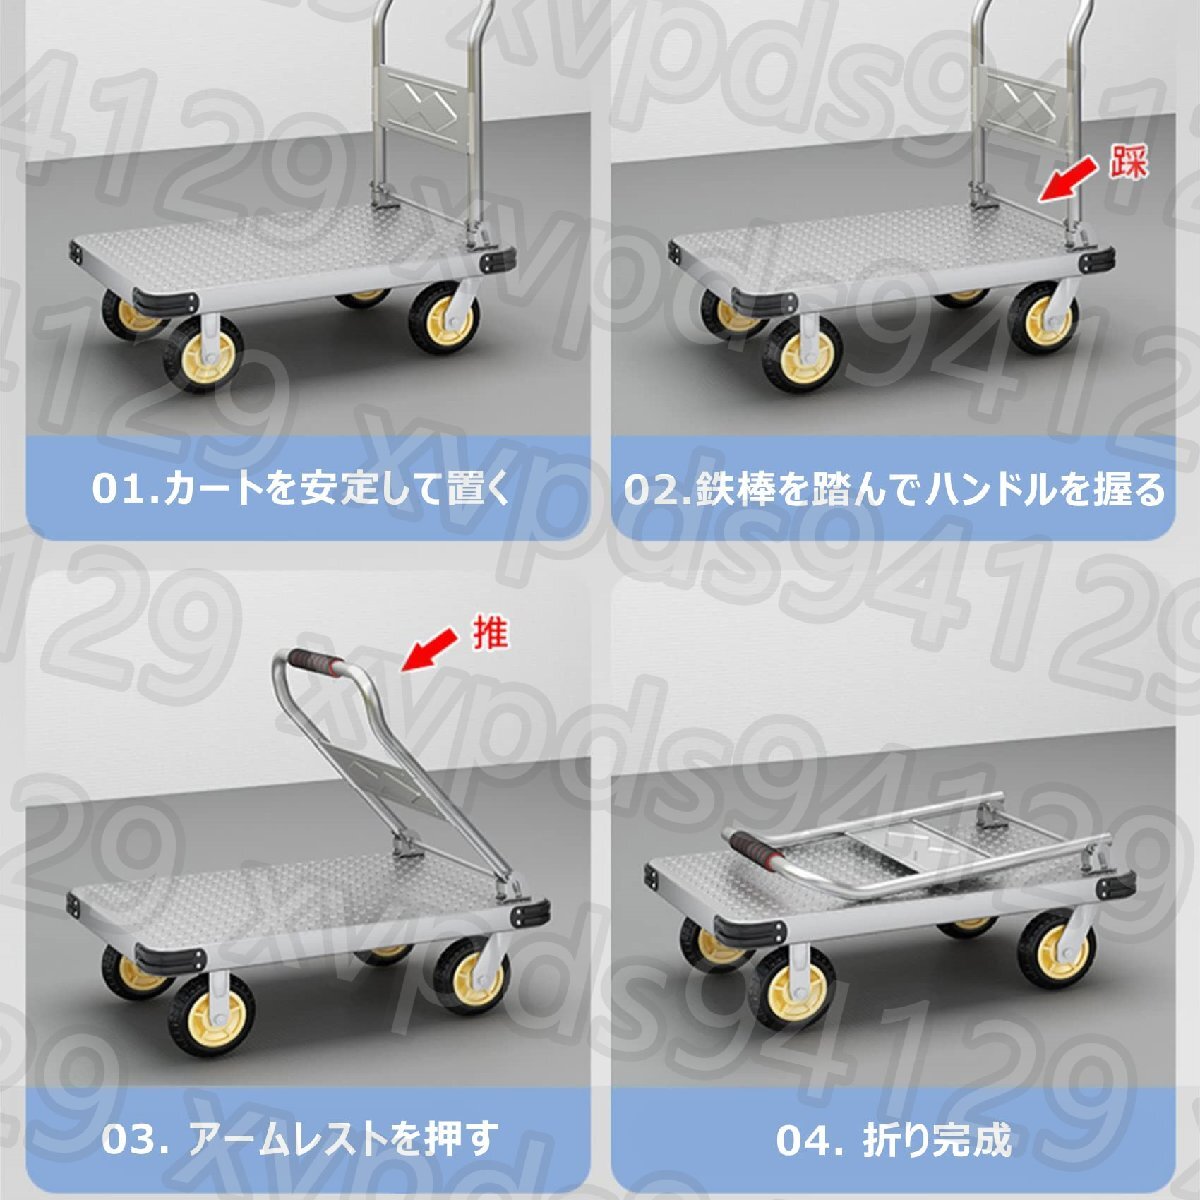  push car folding light weight quiet sound carry cart with casters . withstand load 150KG trolley fixation rope attaching basket push car 90*60cm+6 -inch wheel 